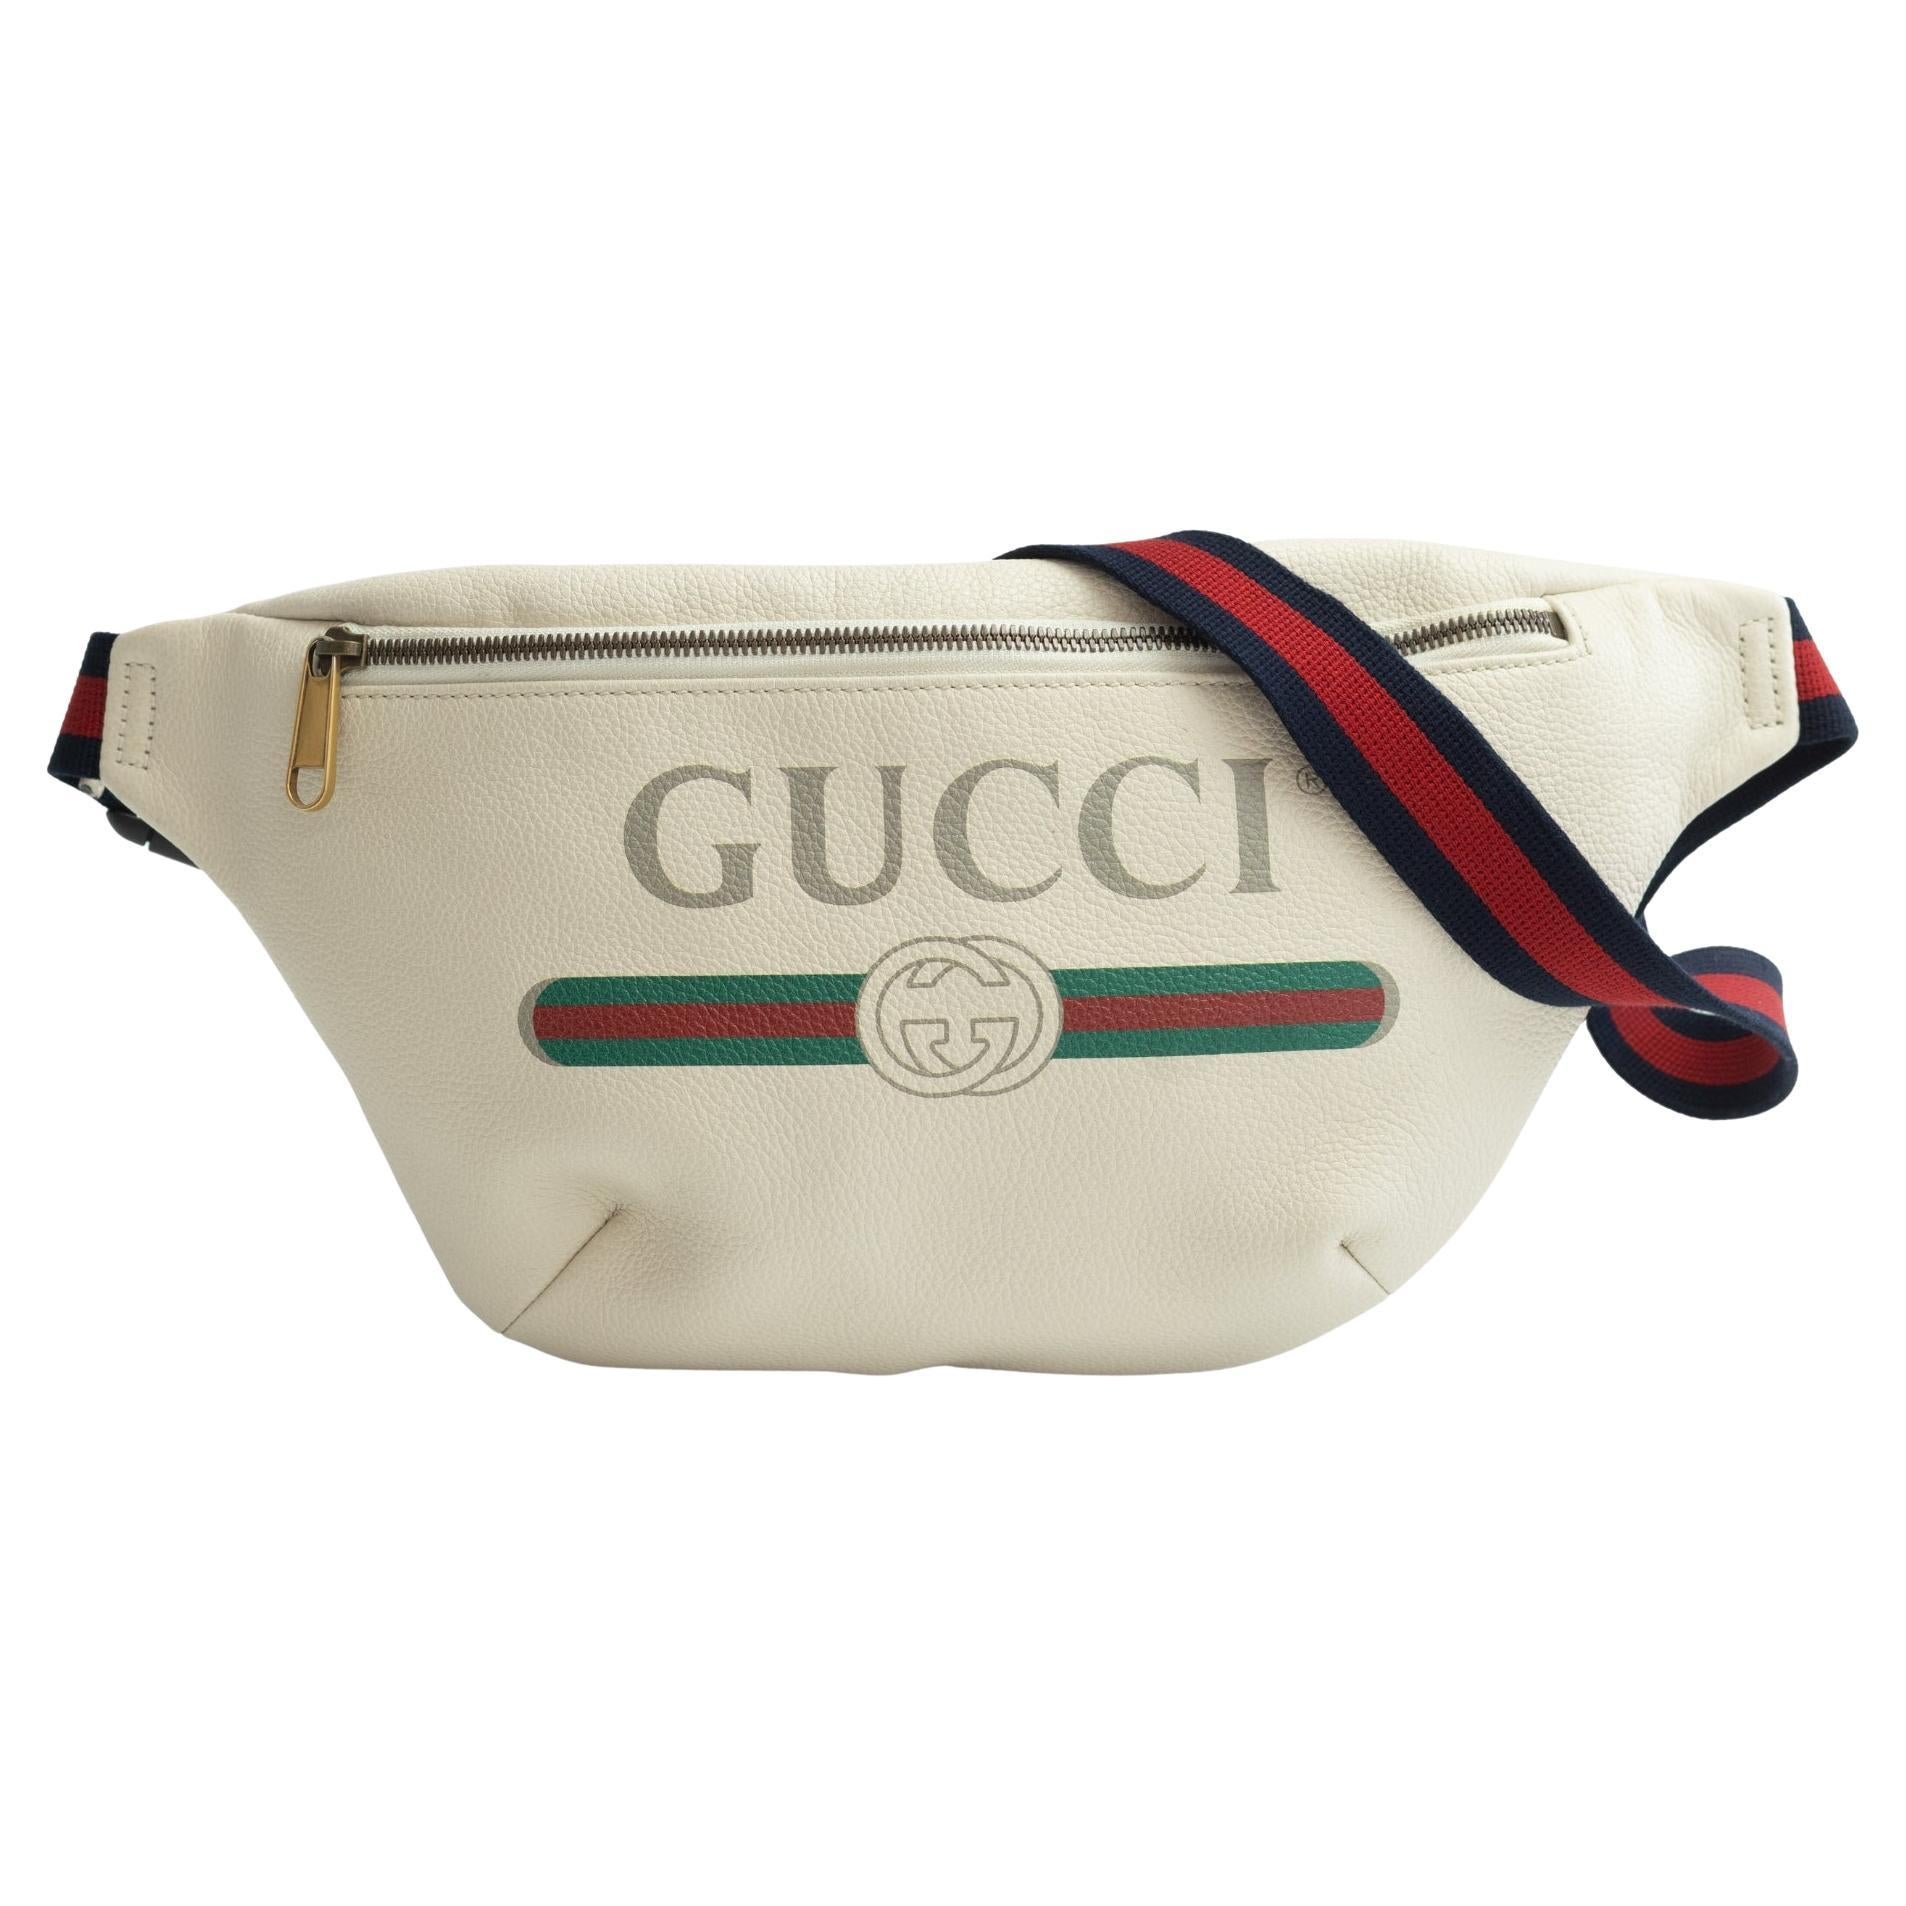 Gucci Logo Bags - 257 For Sale on 1stDibs | gucci emblem for sale